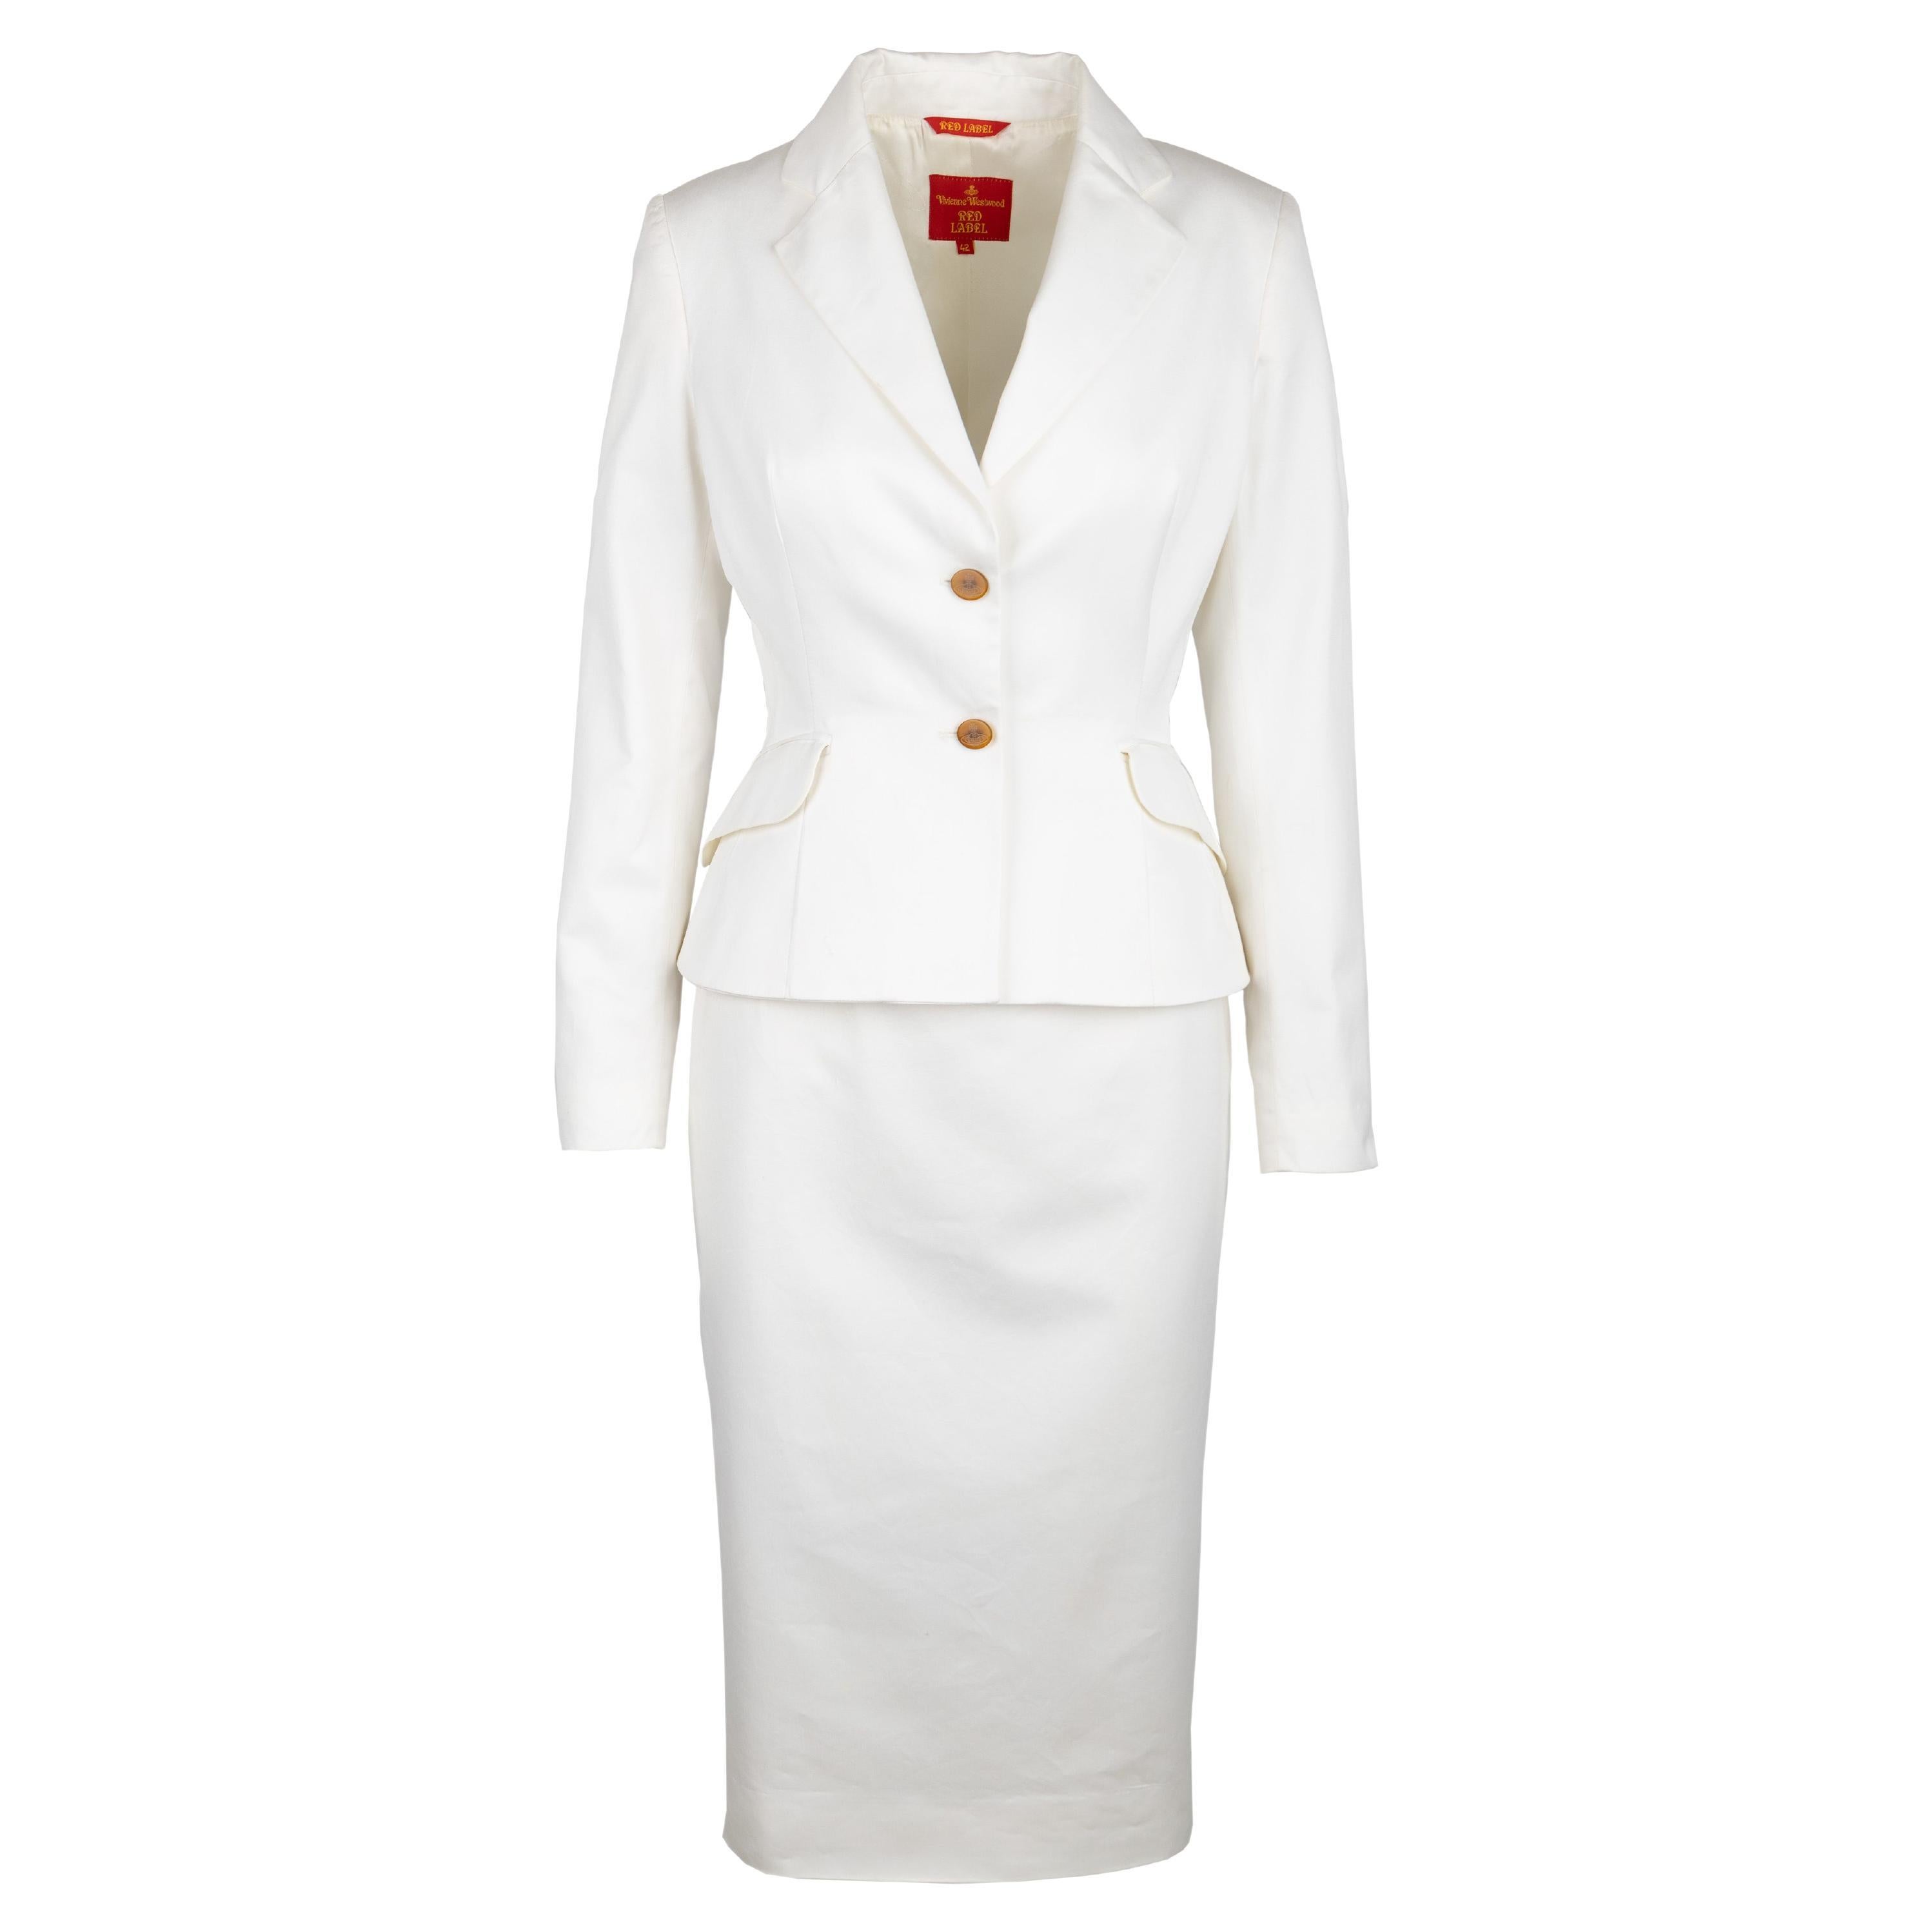 Vivienne Westwood White Cotton Skirt and Jacket Set - '10s